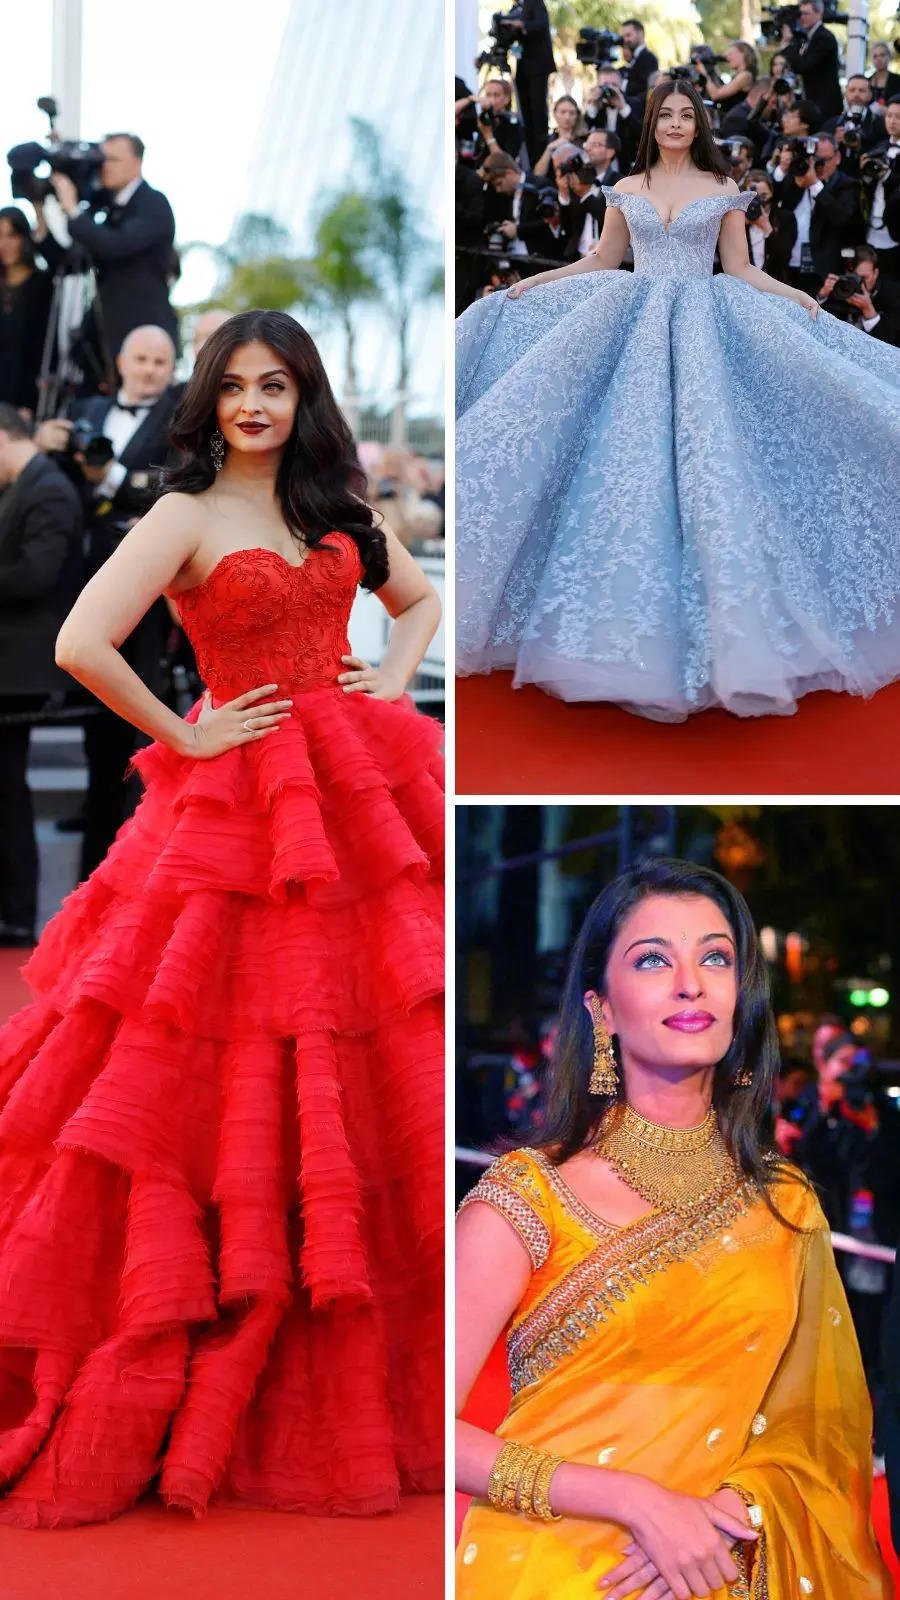 Aishwarya Rai Bachchan at Cannes 2019: The Actress' Red Carpet Outing Was  All About Drama and Some More Drama | 📸 Latest Photos, Images & Galleries  | LatestLY.com